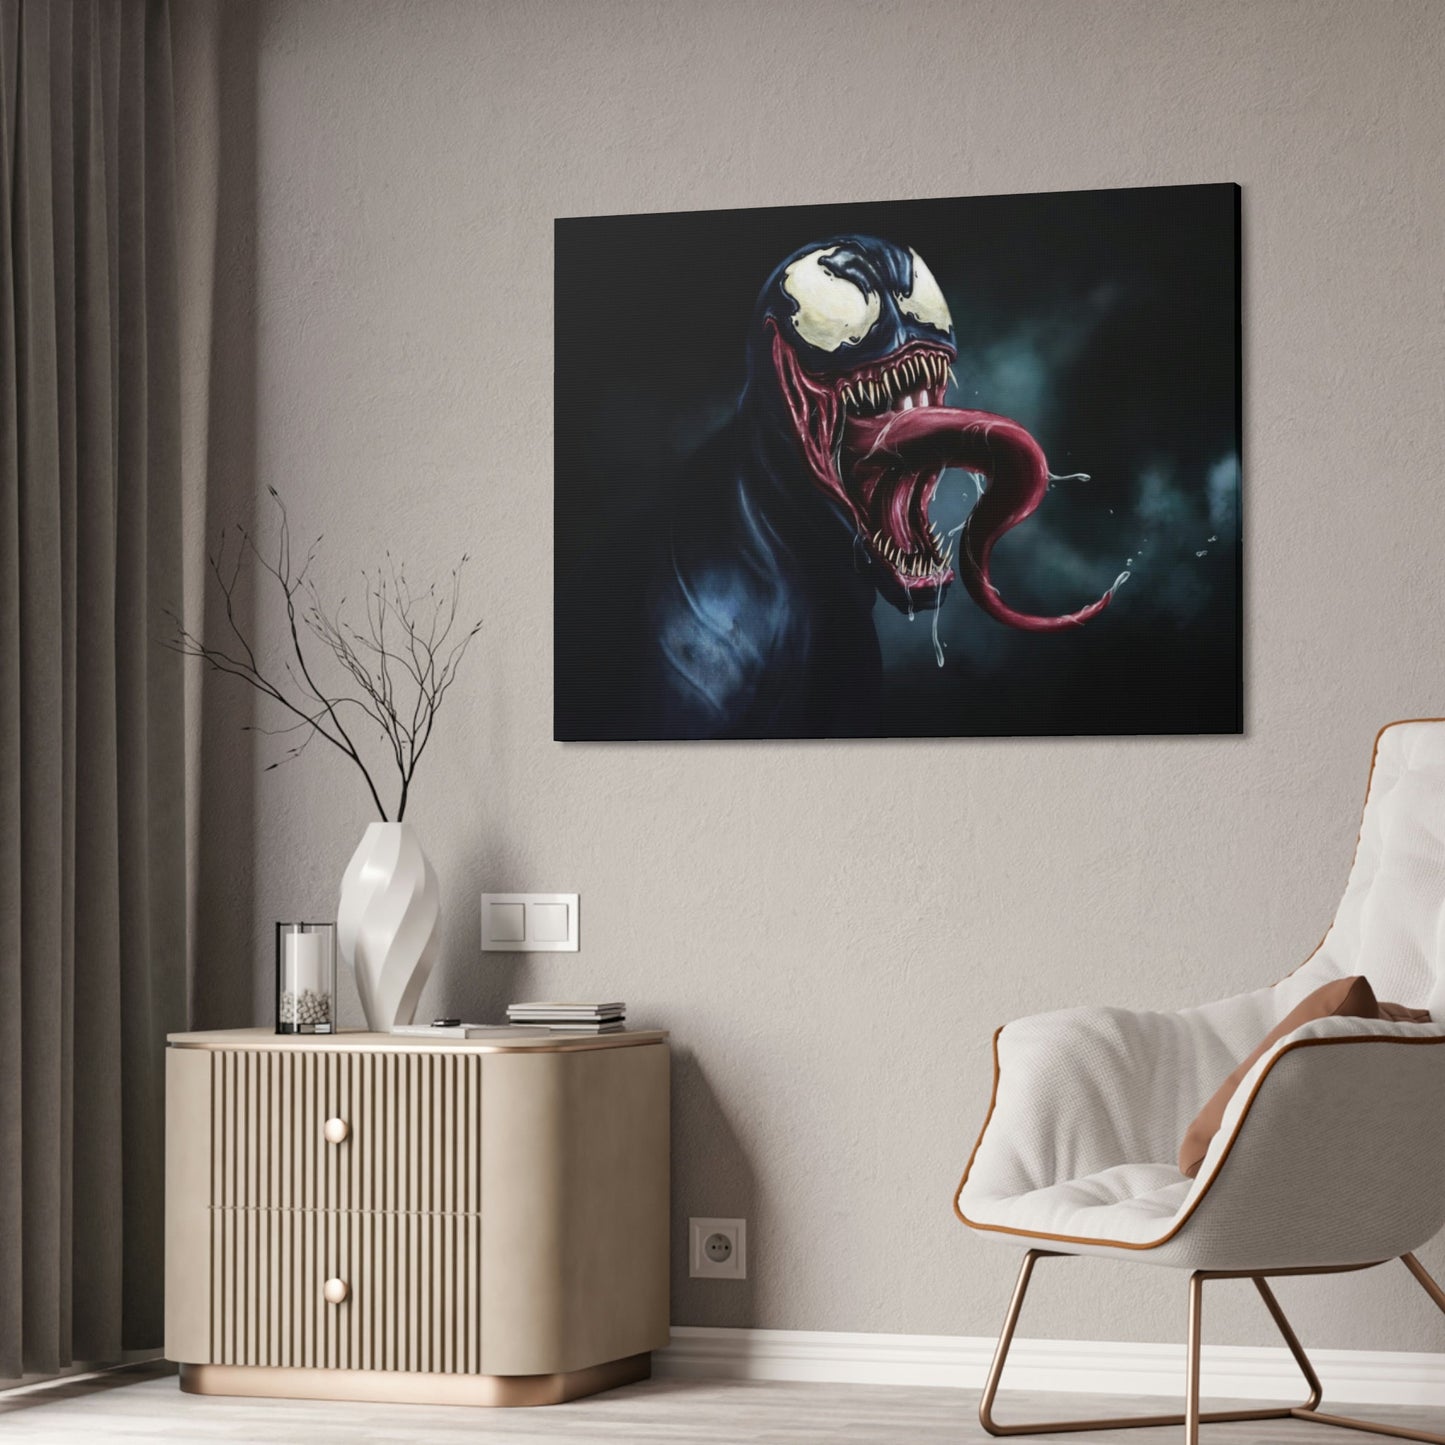 Explore New Worlds: Sci-Fi and Fantasy Framed Canvas Wall Art with Venomous Detail